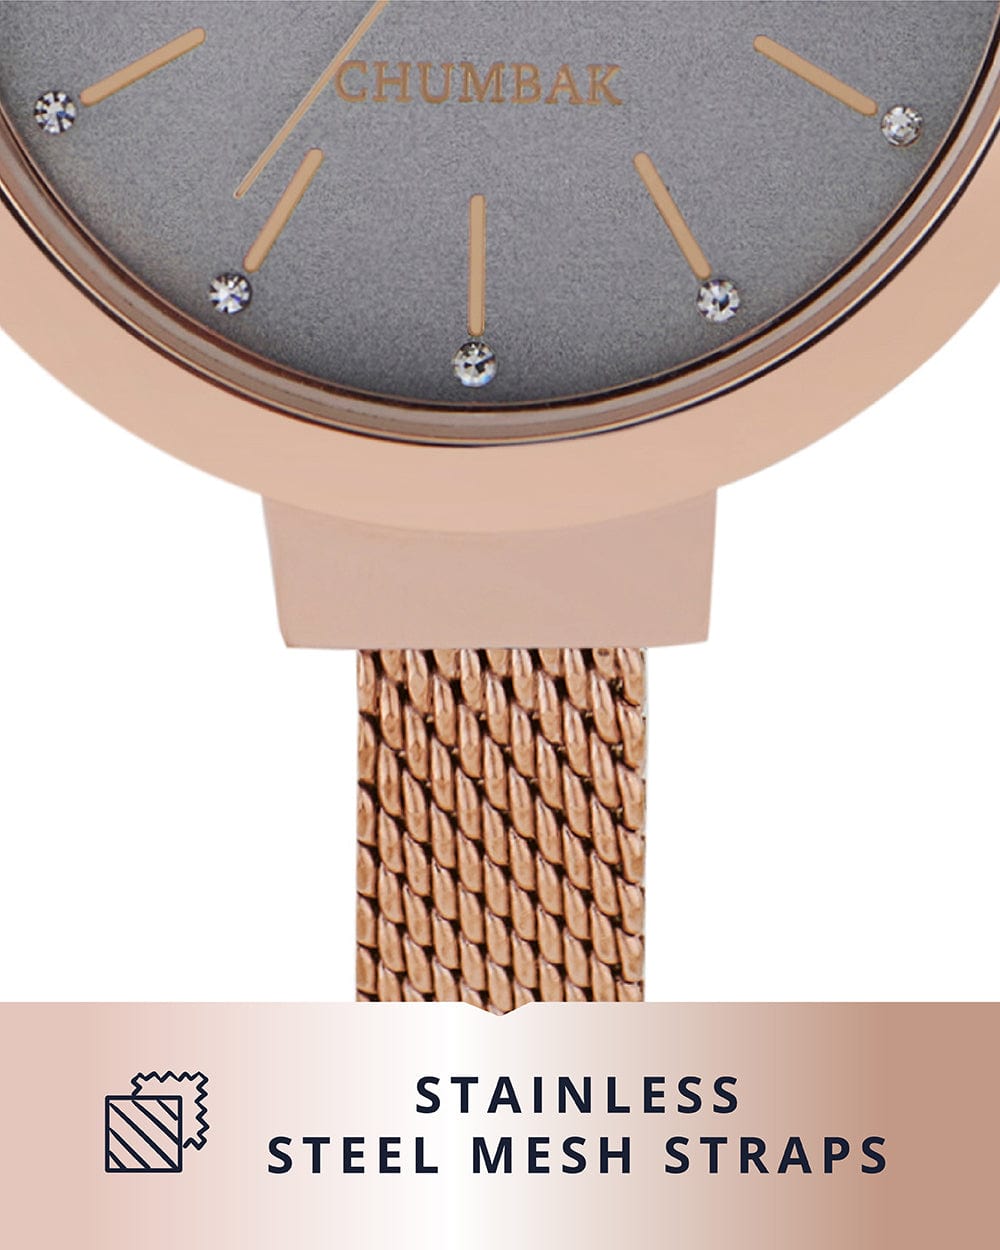 Chumbak Stainless Steel Spell of Subtlety Watch